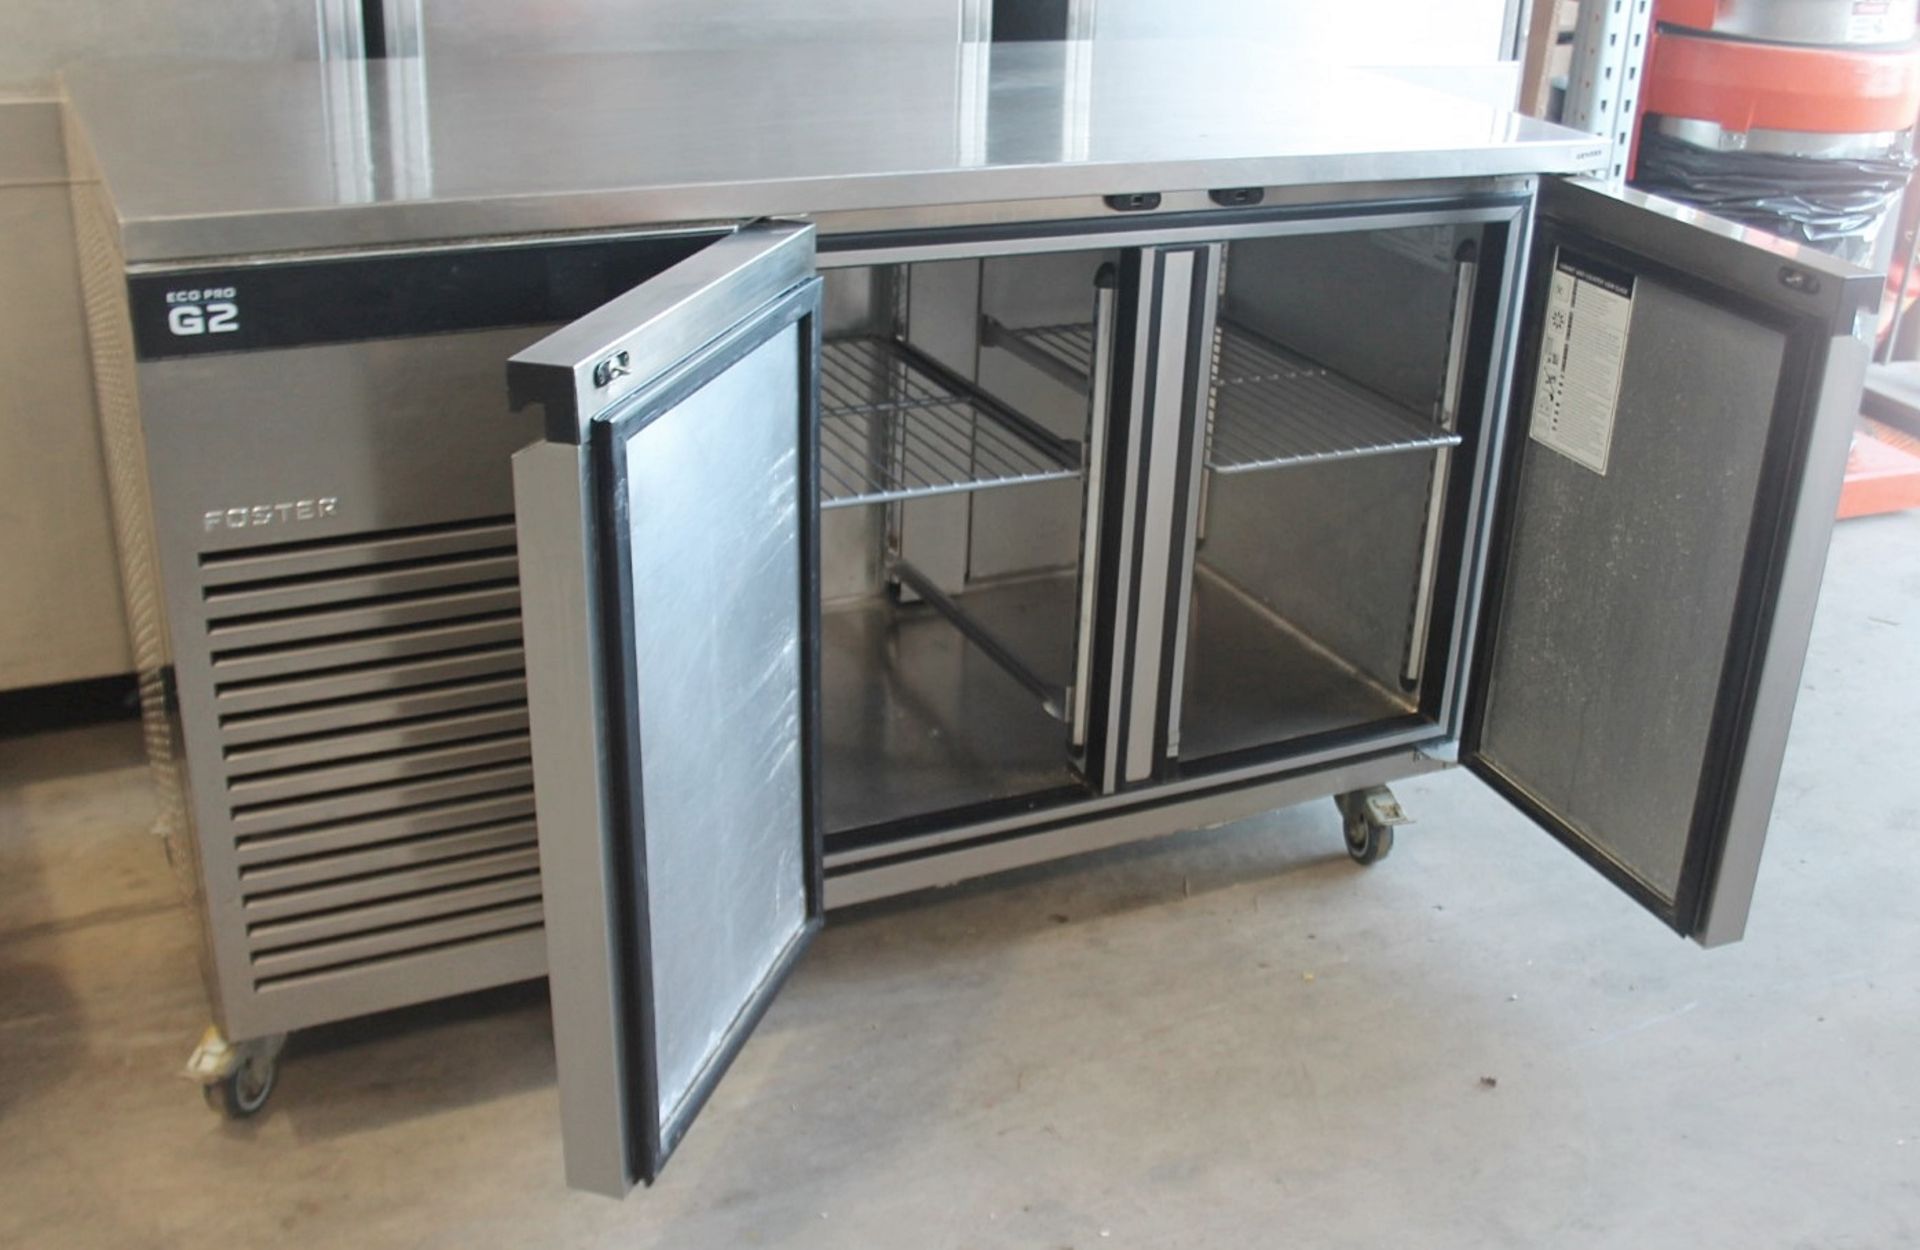 1 x Fosters EcoPro G2 2-Door Commercial Refrigerated Counter - Ref: GEN585 WH2 - CL802 UX - Image 2 of 4